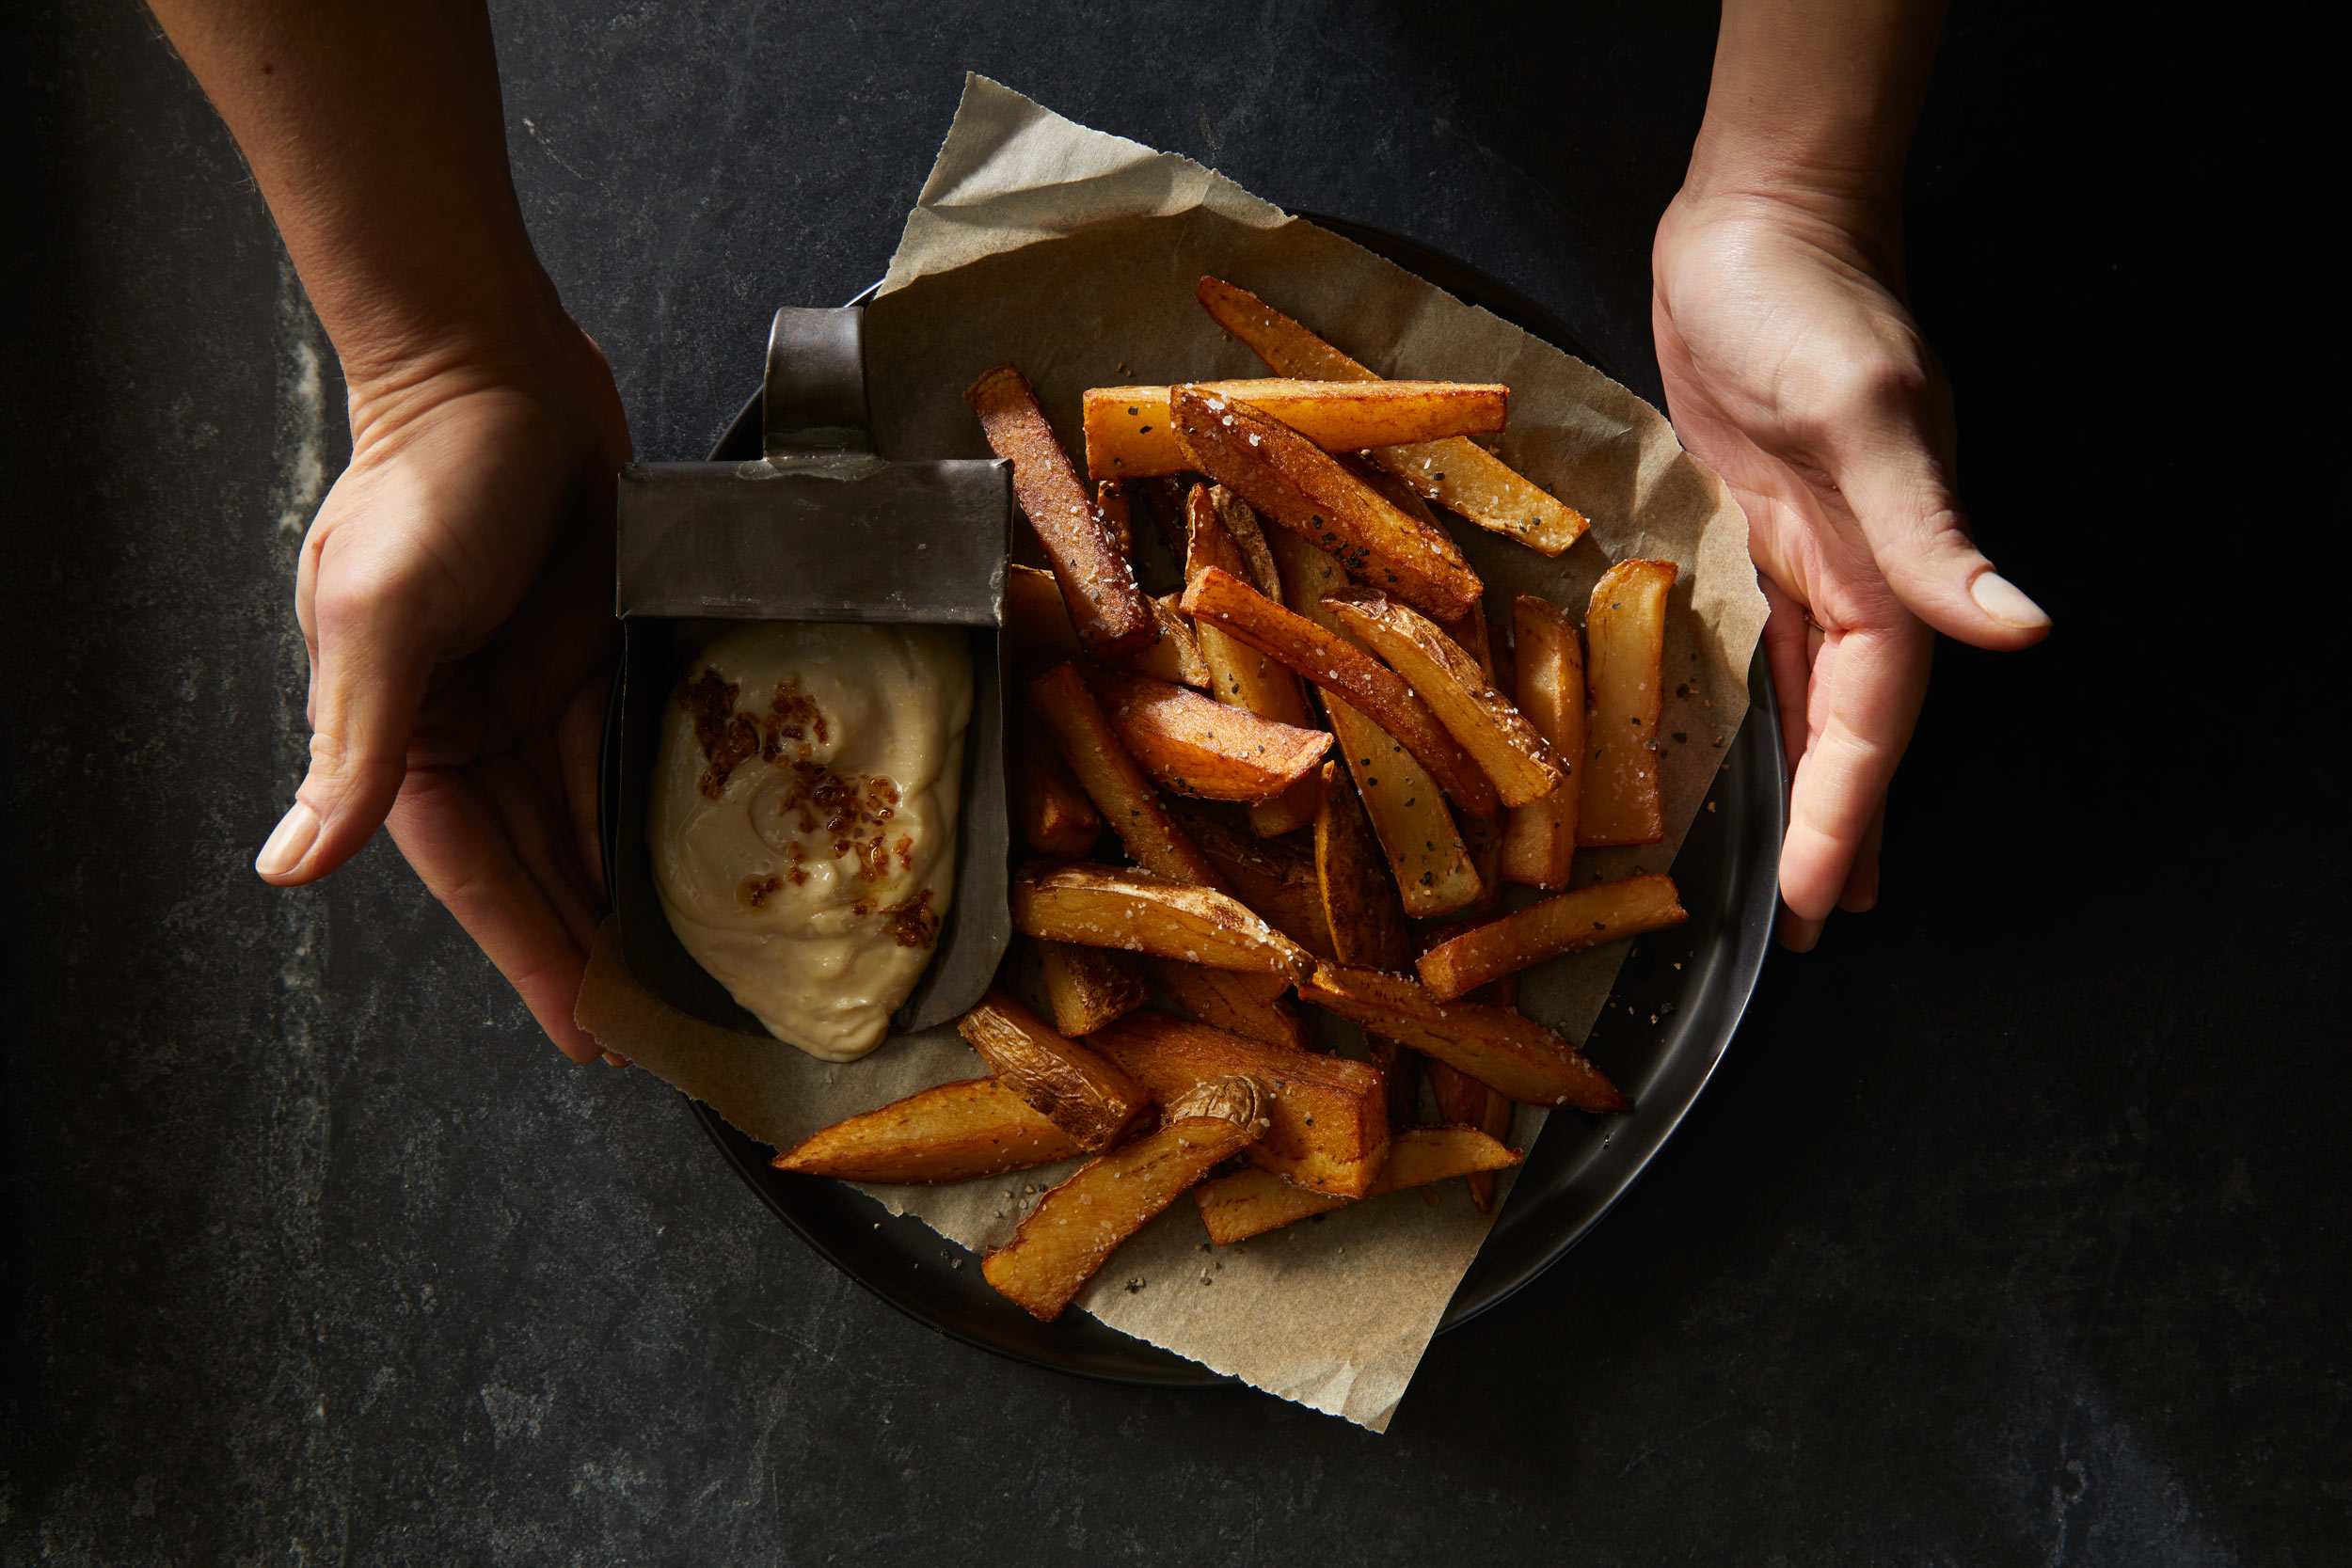 French Fries photo by Chris Kessler Photography.  Chris Kessler is a freelance Photographer based in Milwaukee Wisconsin. Specializing in Food photography and portraiture.